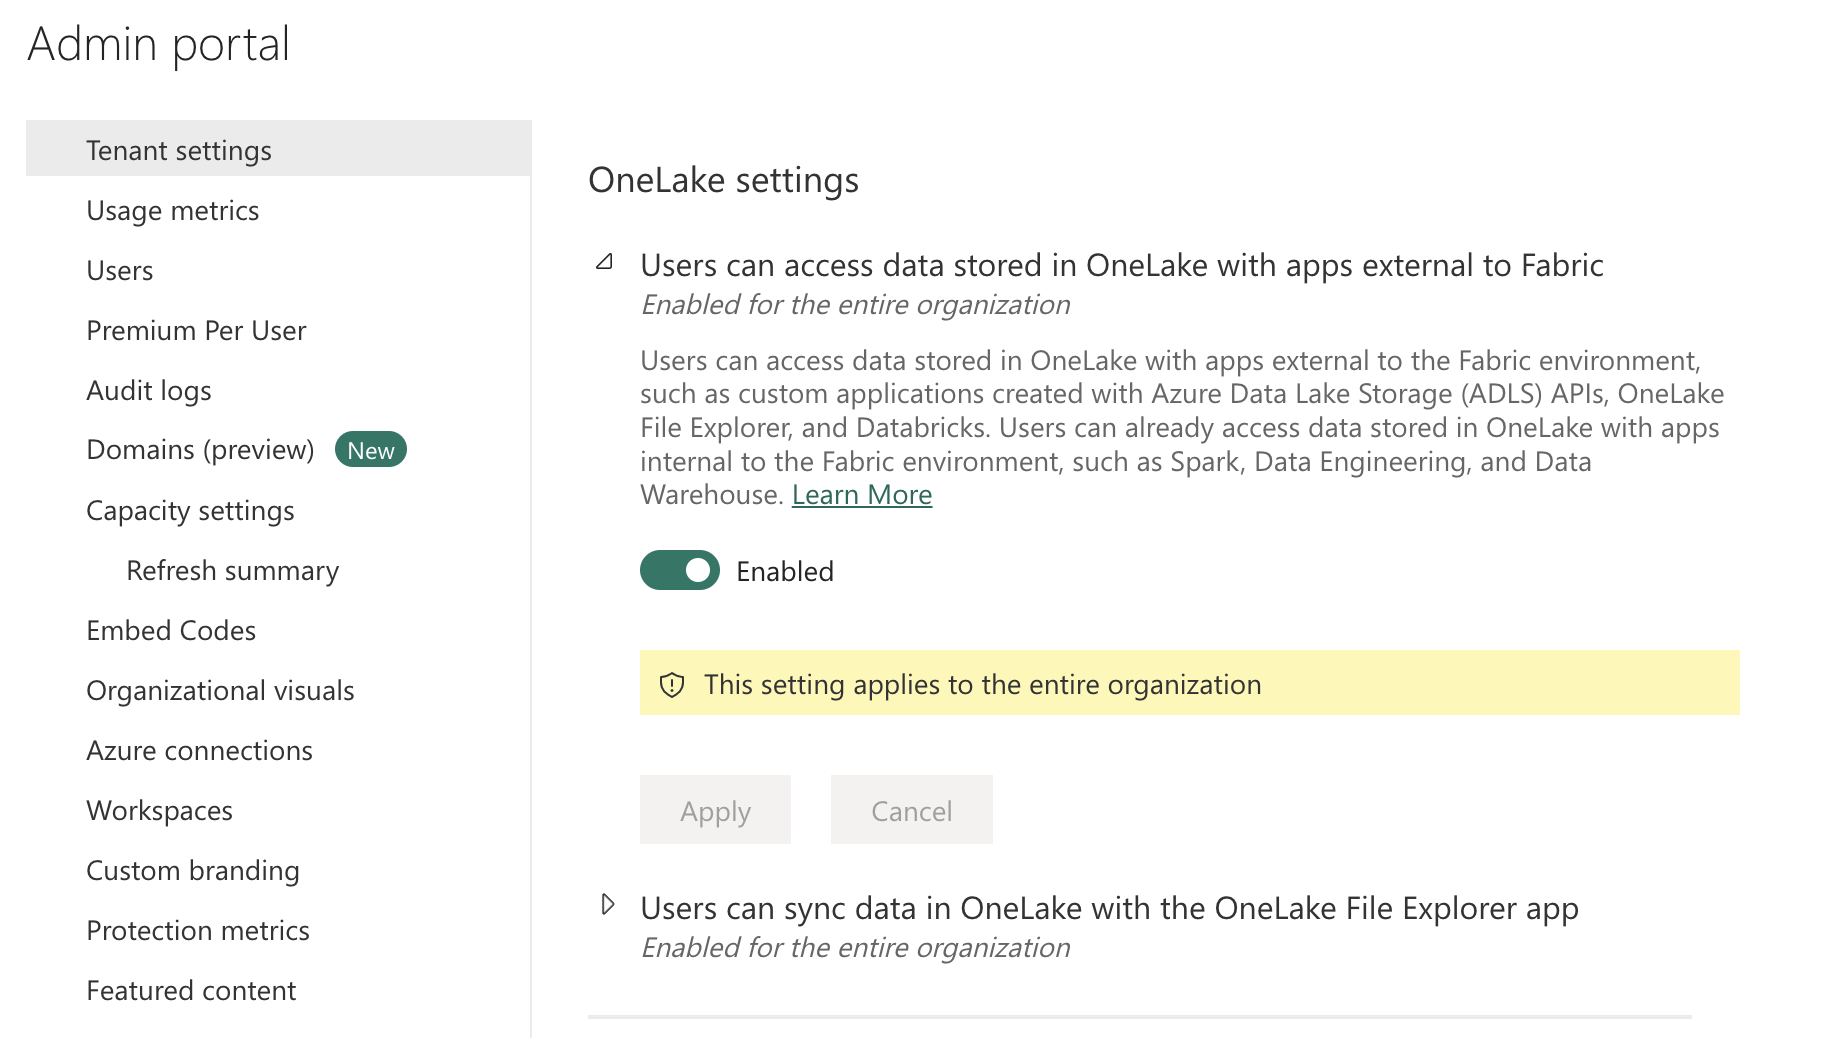 Users can access data stored in OneLake with apps external to Fabric